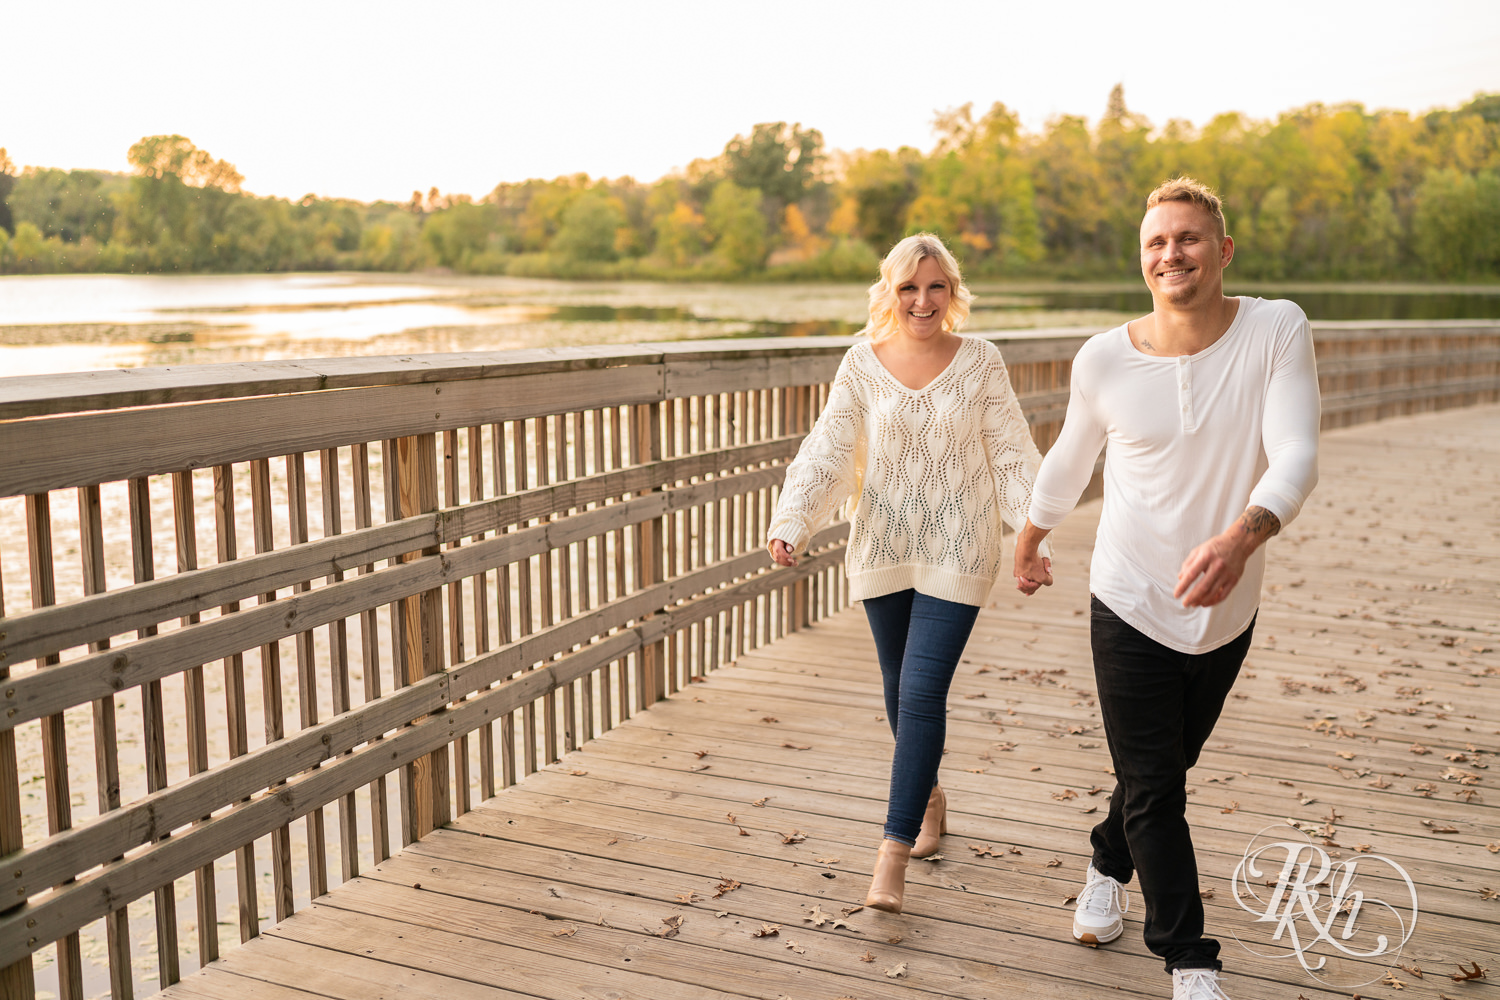 Blond woman and man in white shirts and jeans walk on bridge during sunset engagement photos at Lebanon Hills Regional Park in Eagan, Minnesota.